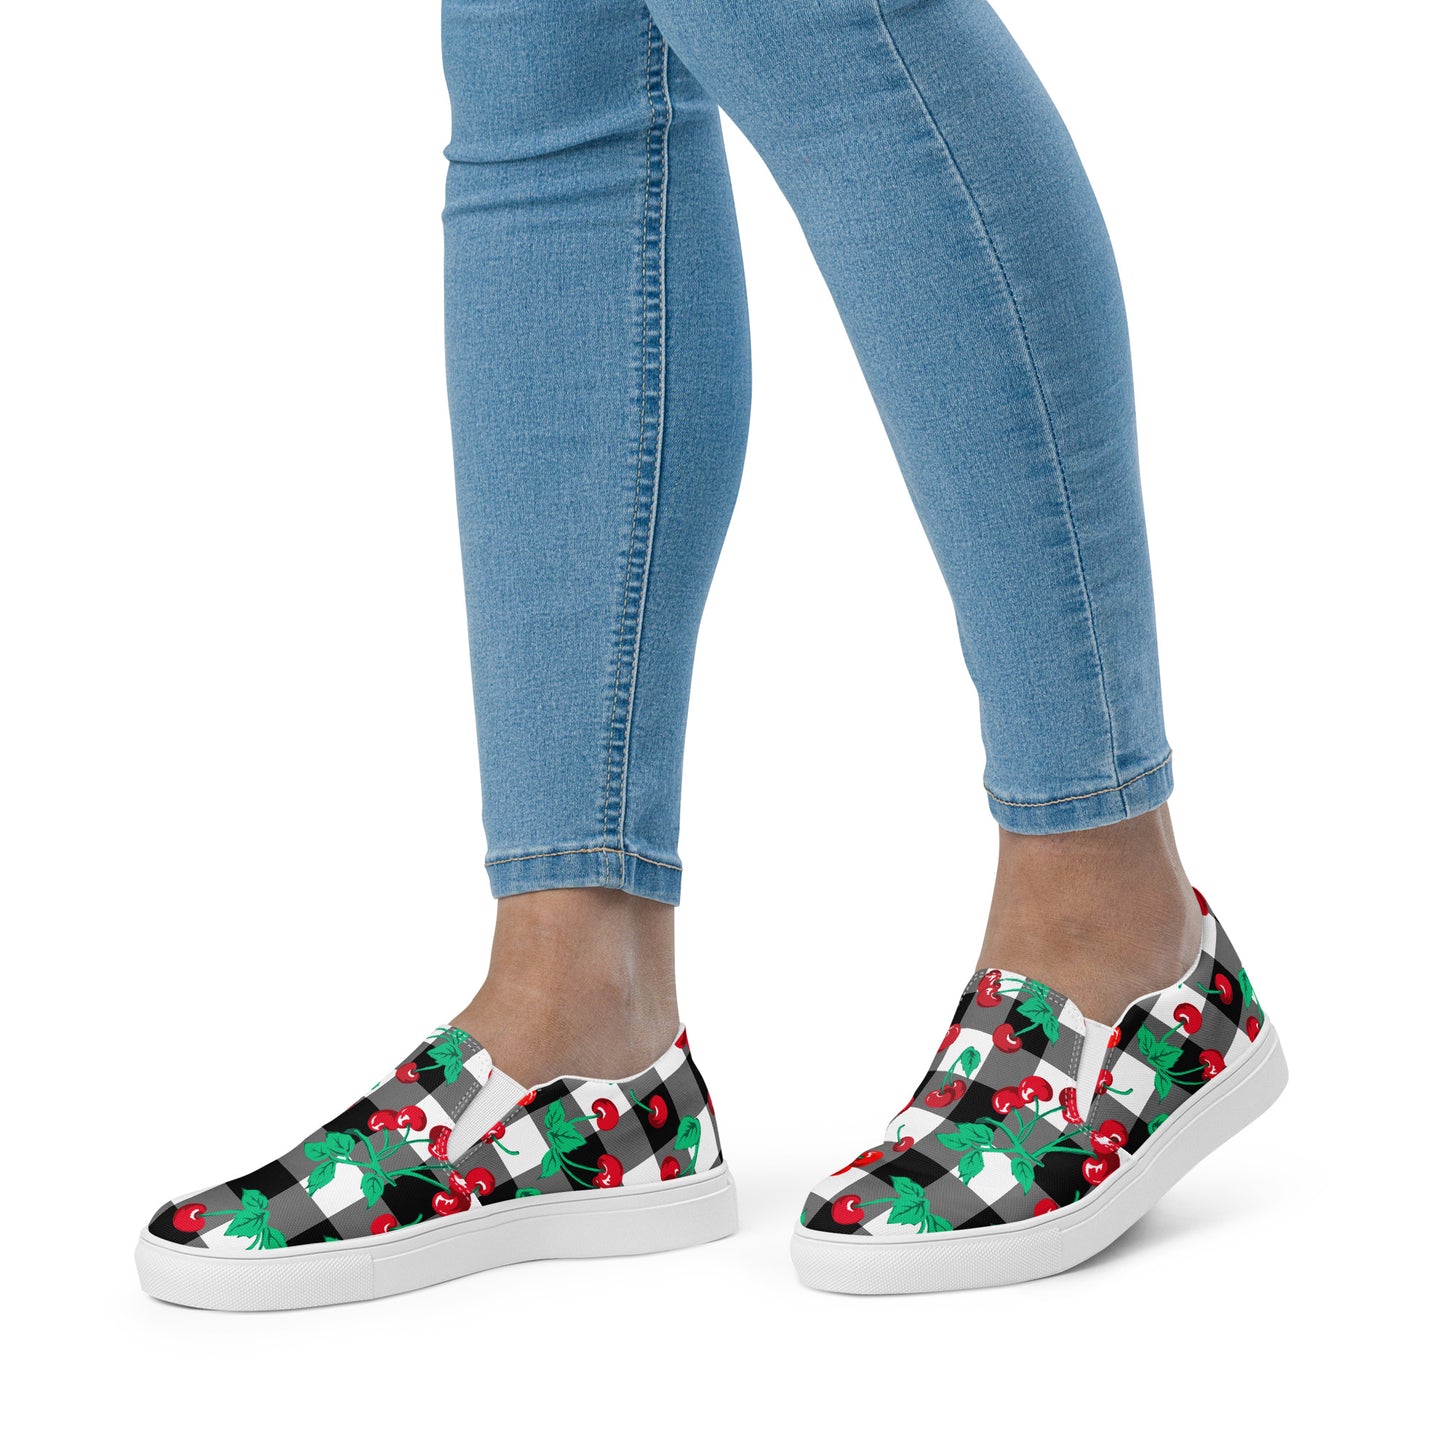 Black Gingham Cherry Girl Women’s Canvas Slip-On Deck Shoes | Pinup Couture Relaxed